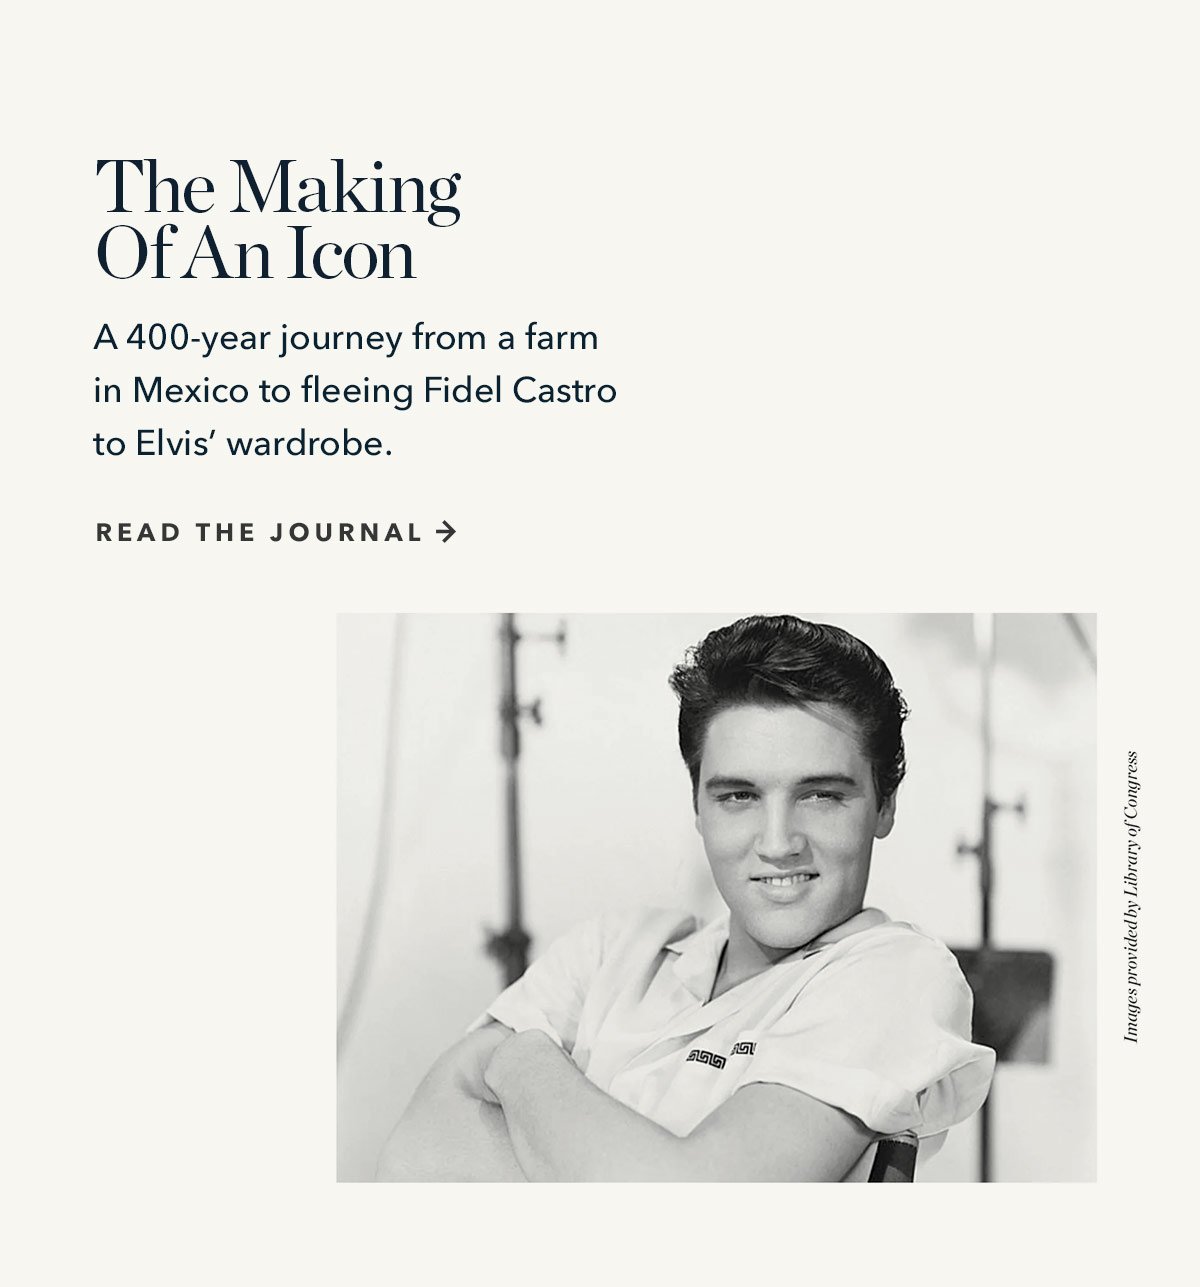 The Making Of An Icon: A 400-year journey from a farm in Mexico to fleeing Fidel Castro to Elvis' wardrobe. Read the Journal: 